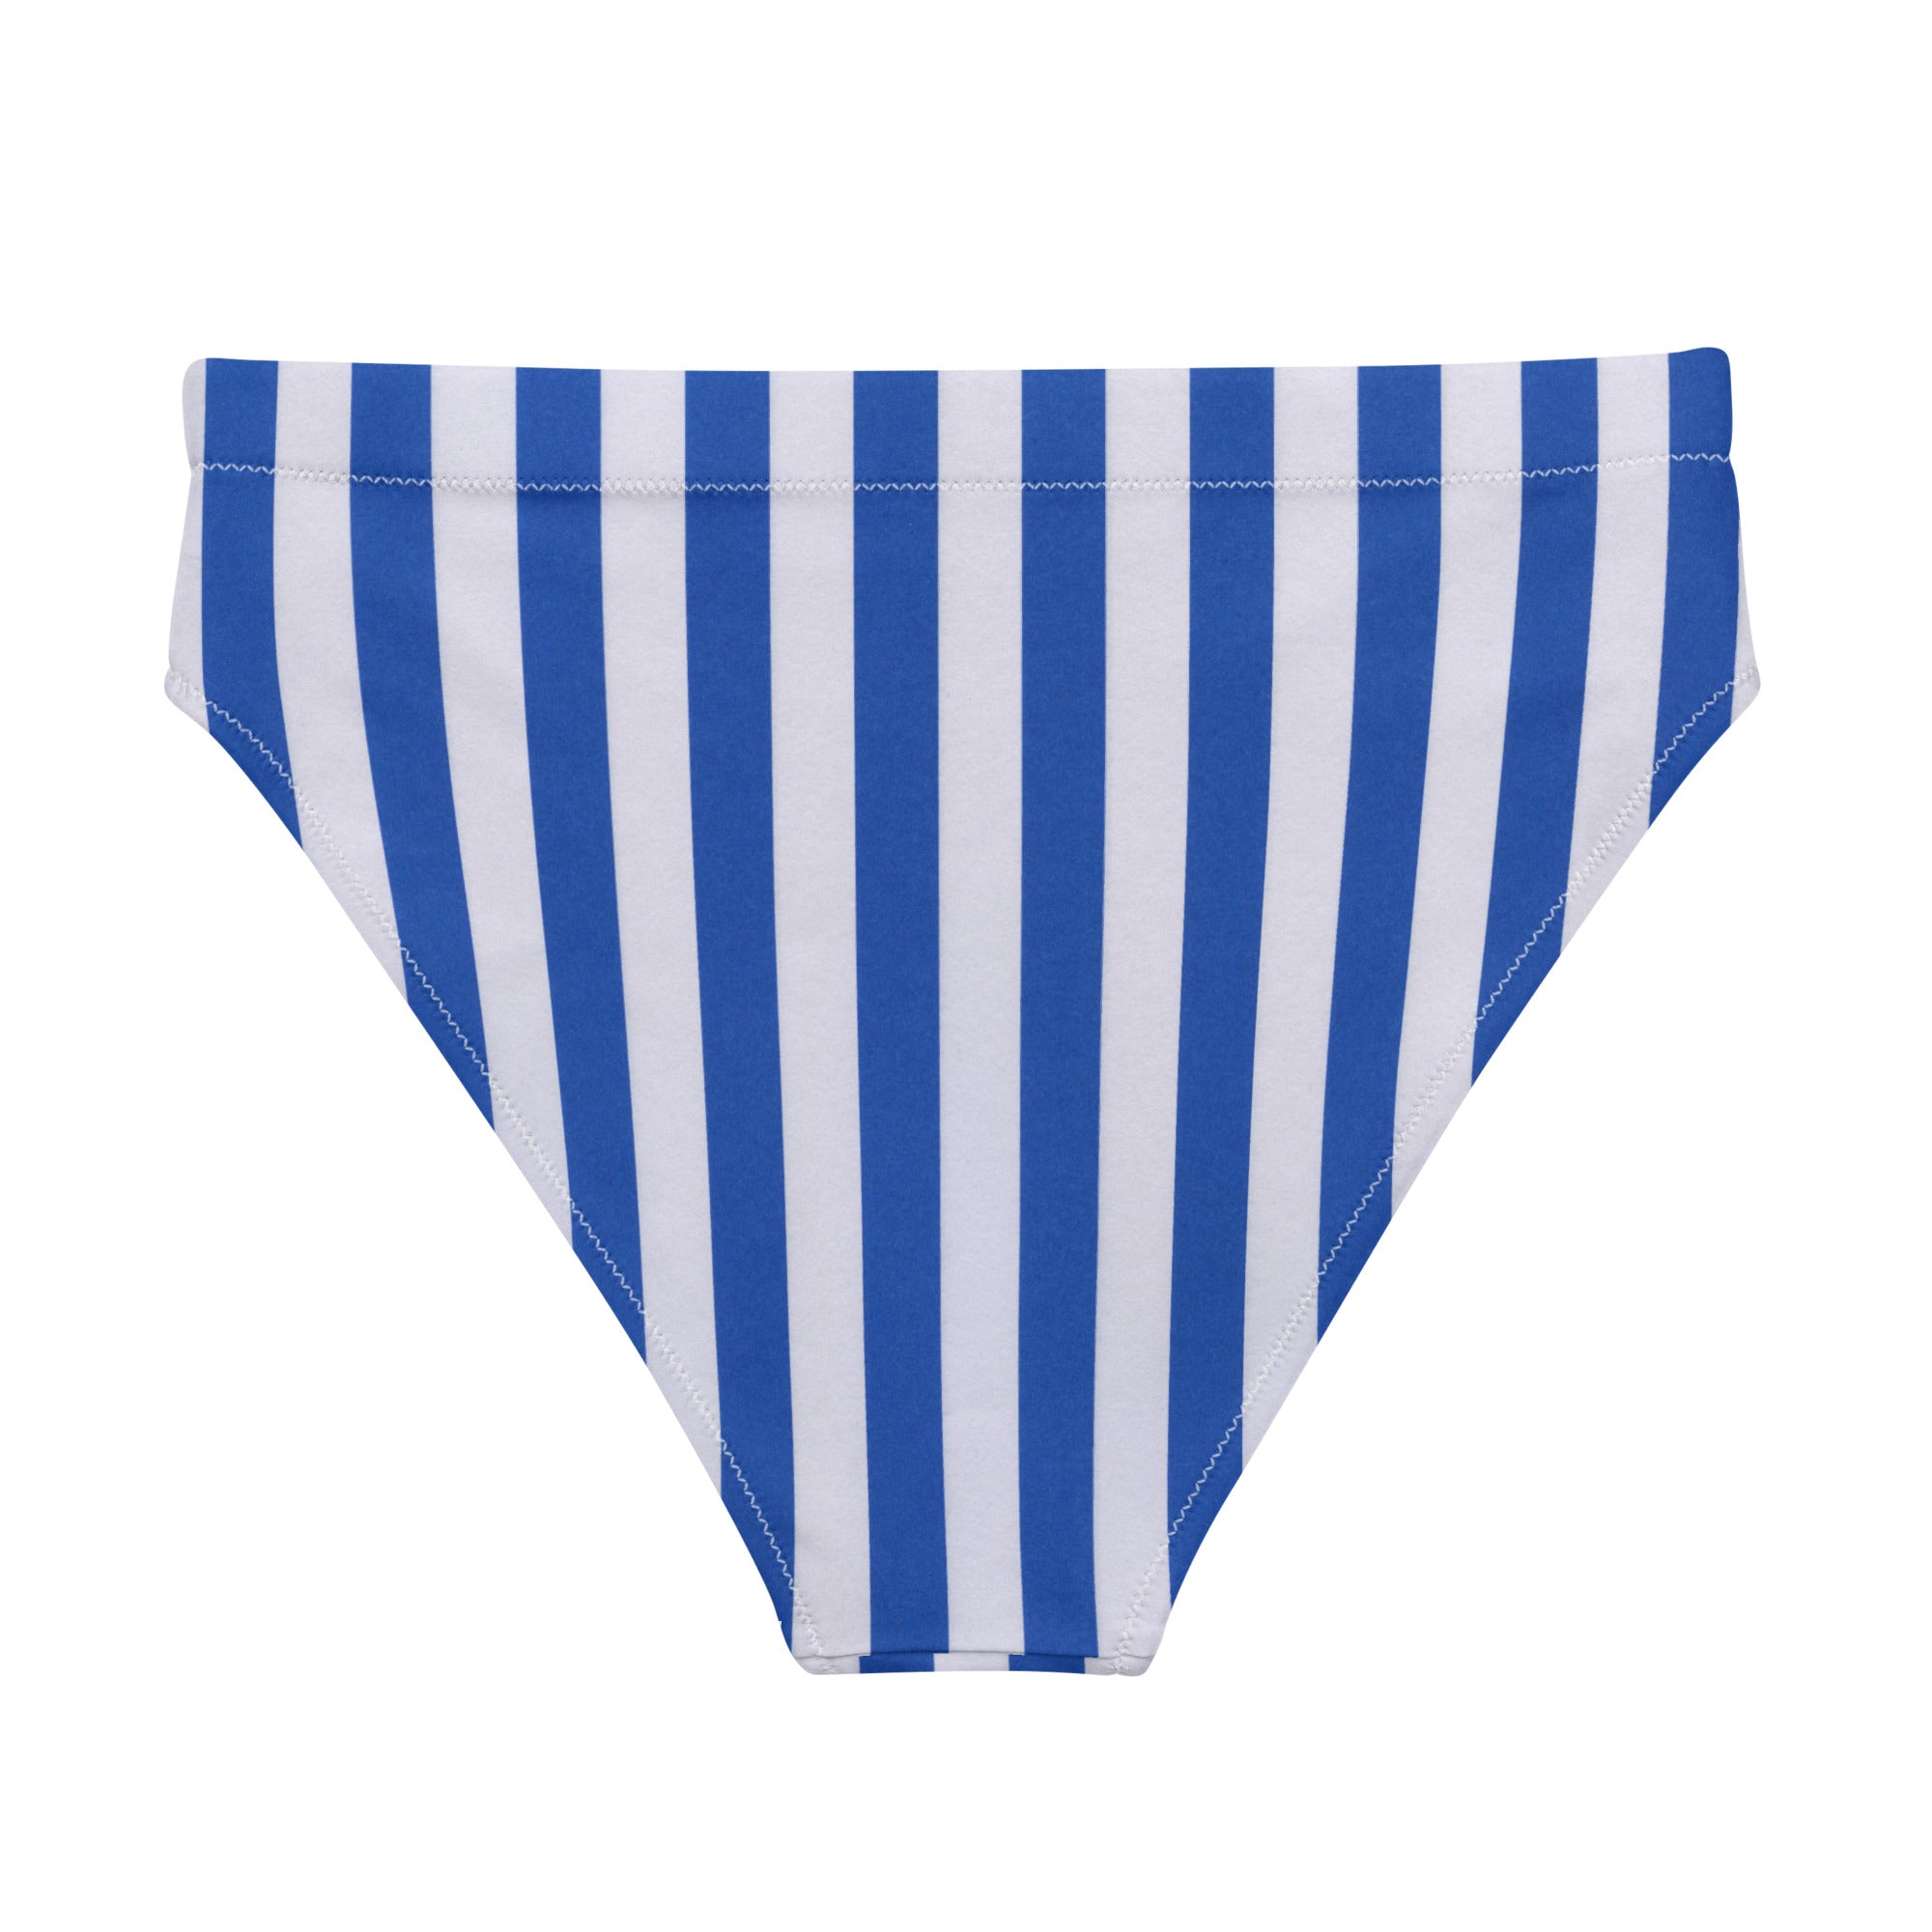 The classic blue and white stripes exude a timeless charm, while the adjustable side ties allow for a customized fit. 